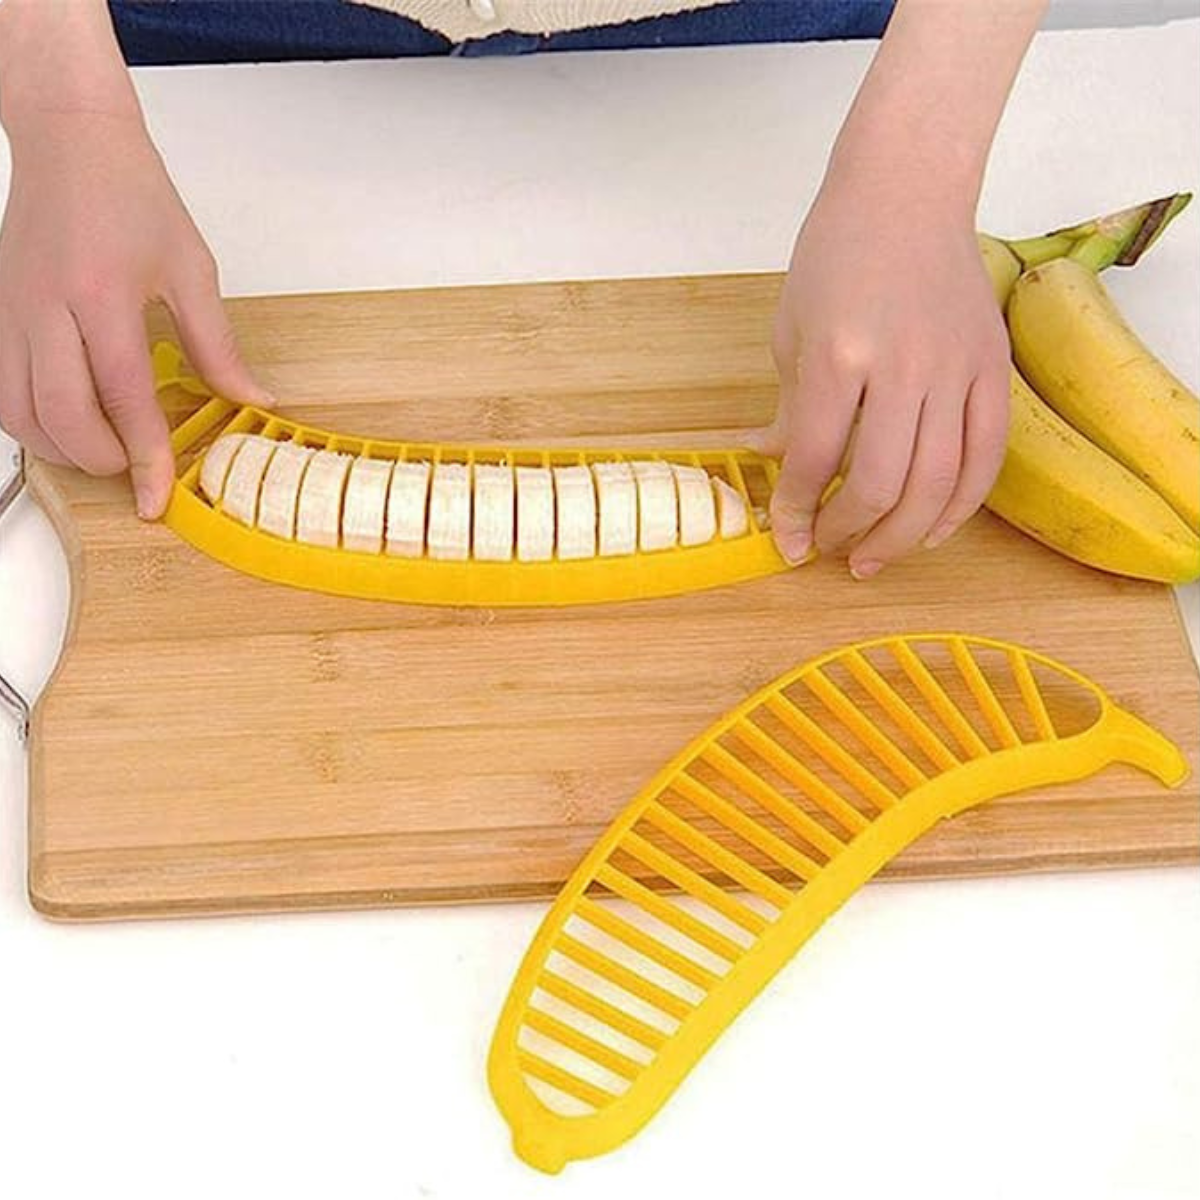 Unusual but Indispensable: 34 Bizarre Kitchen Gadgets You Need In Your Life